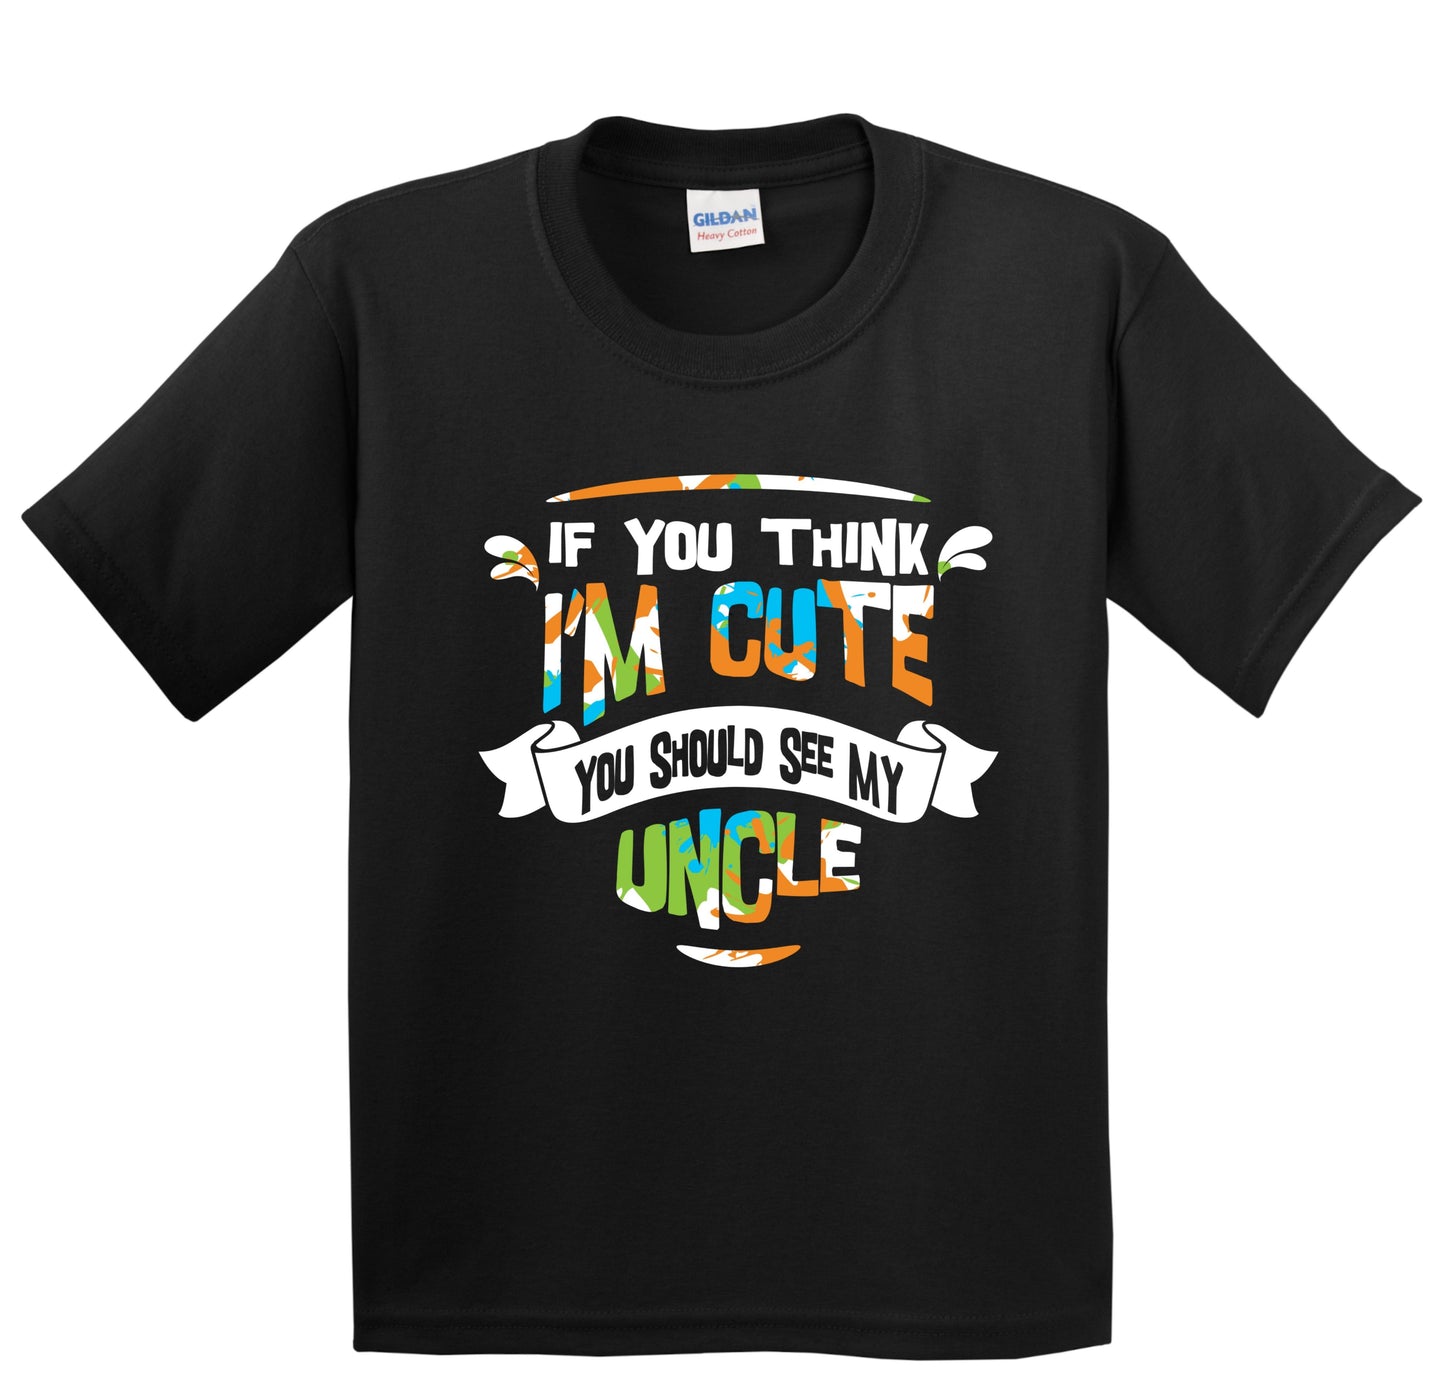 If You Think I'm Cute You Should See My Uncle Funny Kids T-Shirt